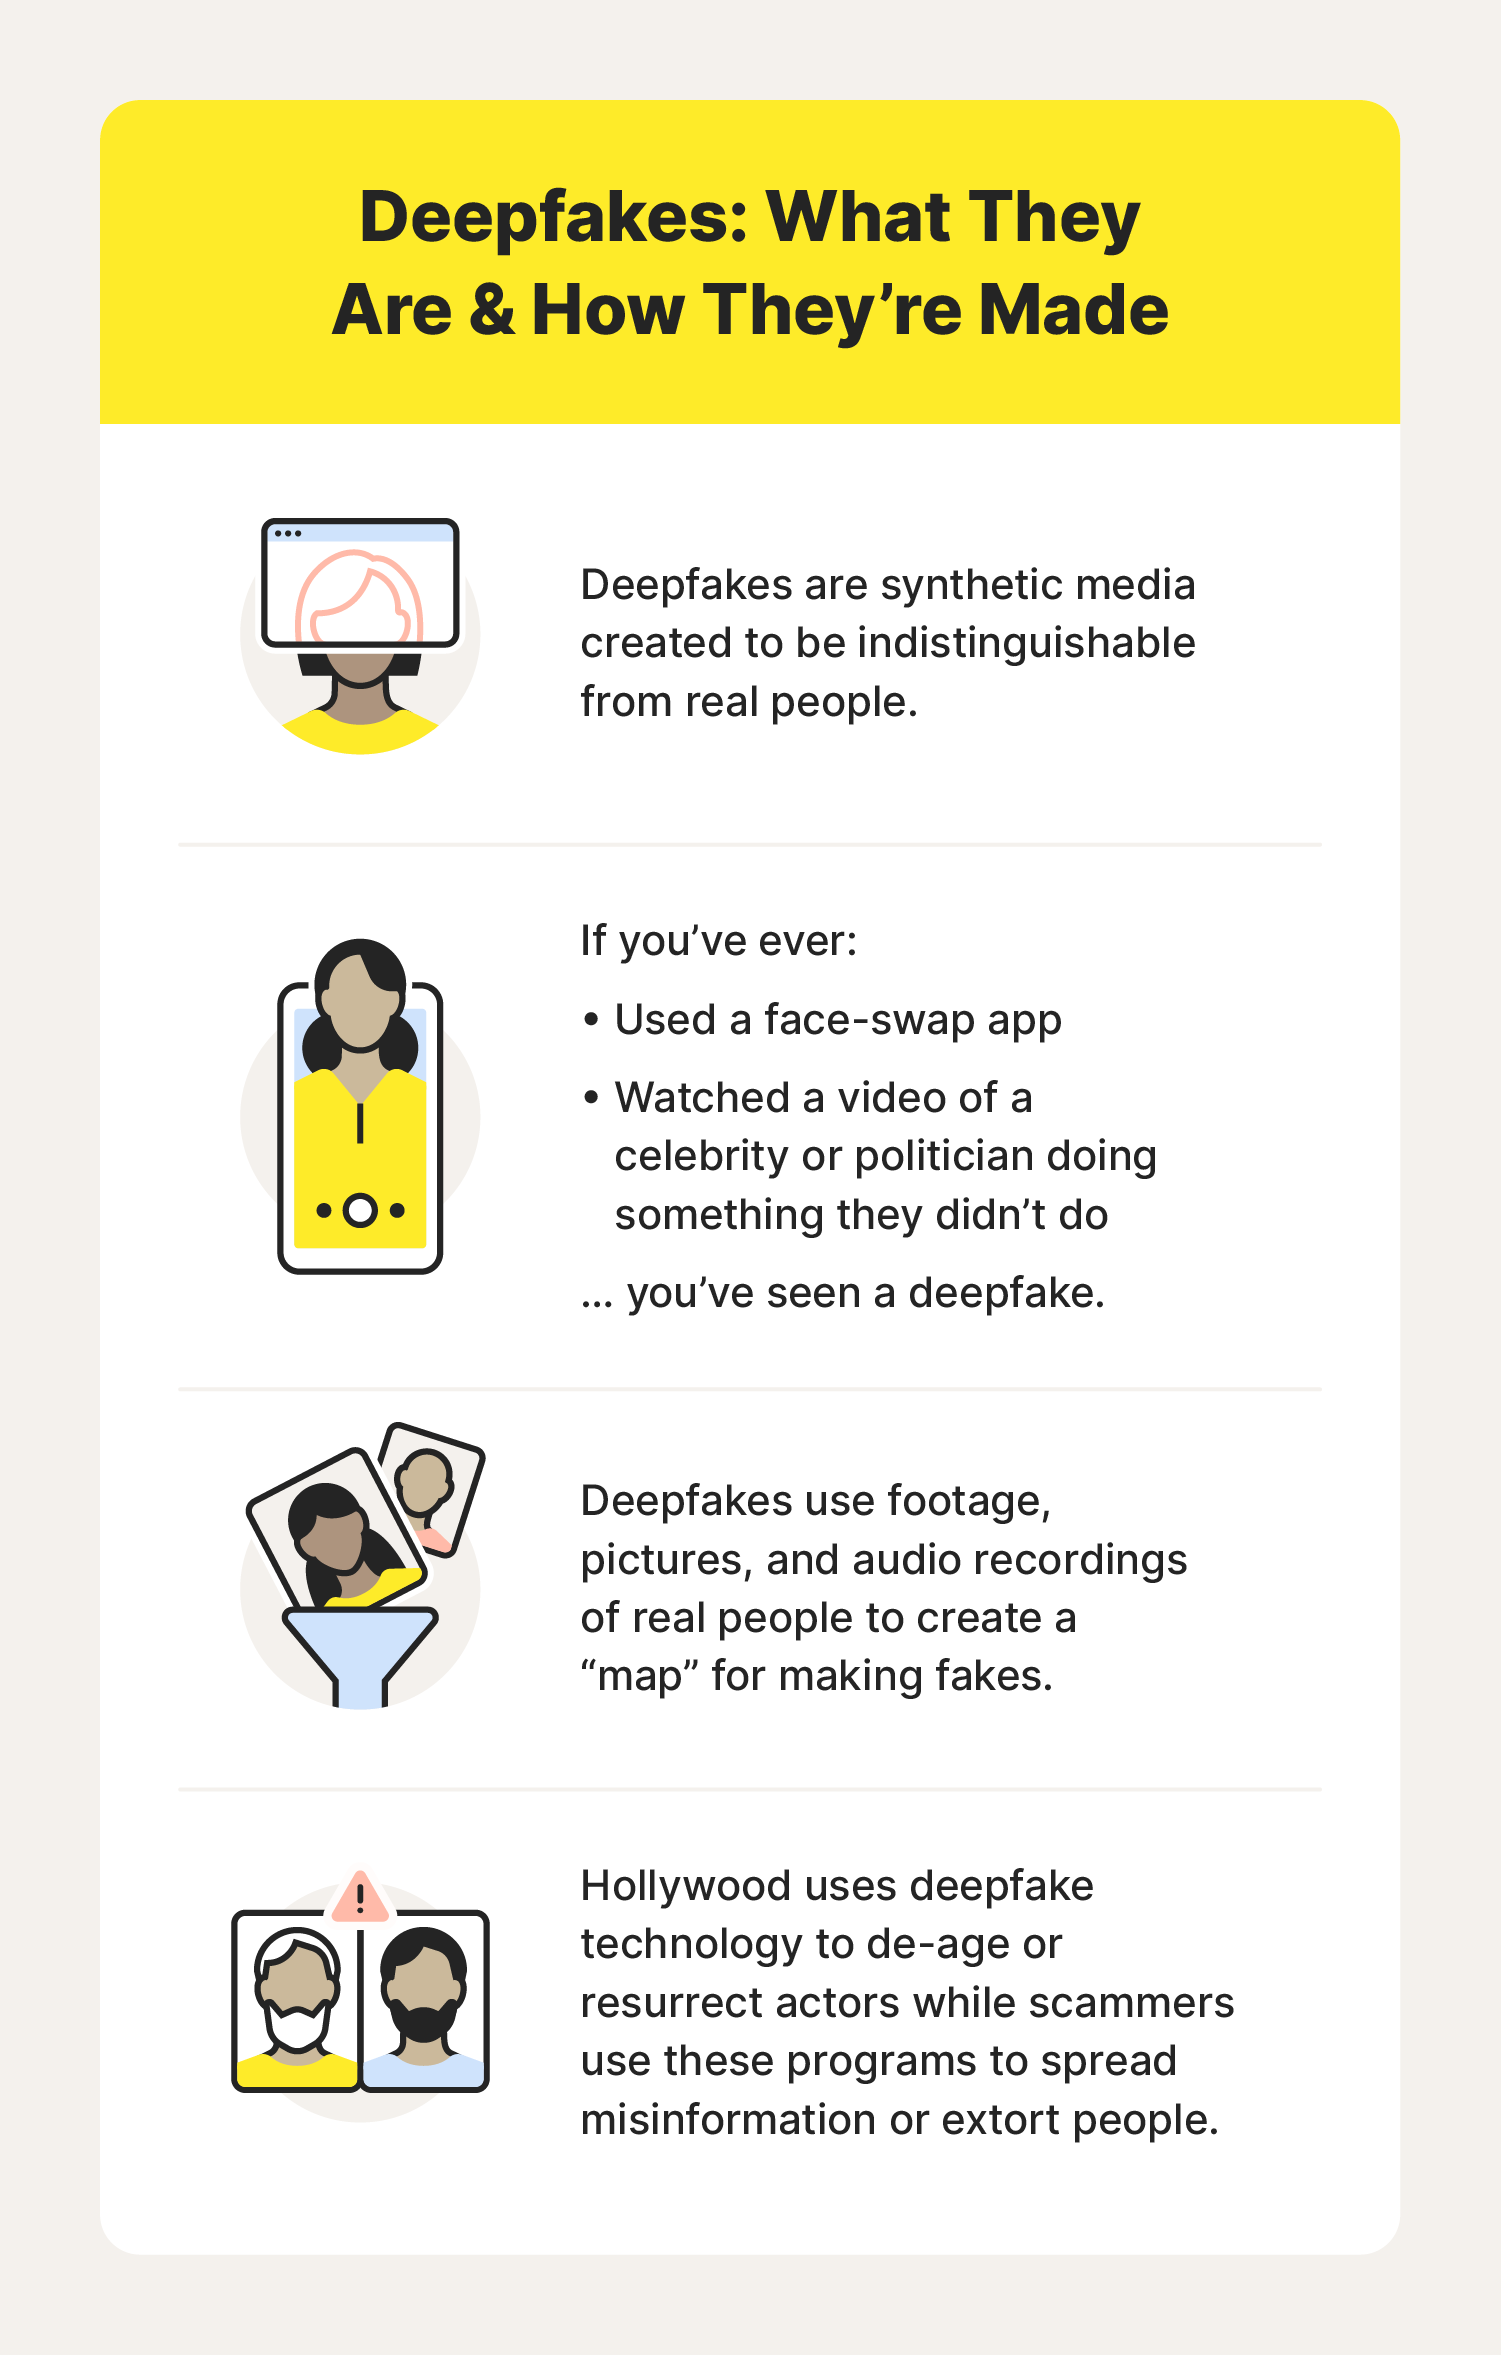 Illustrated chart discussing how deepfakes are created and some common examples, including face-swap apps.